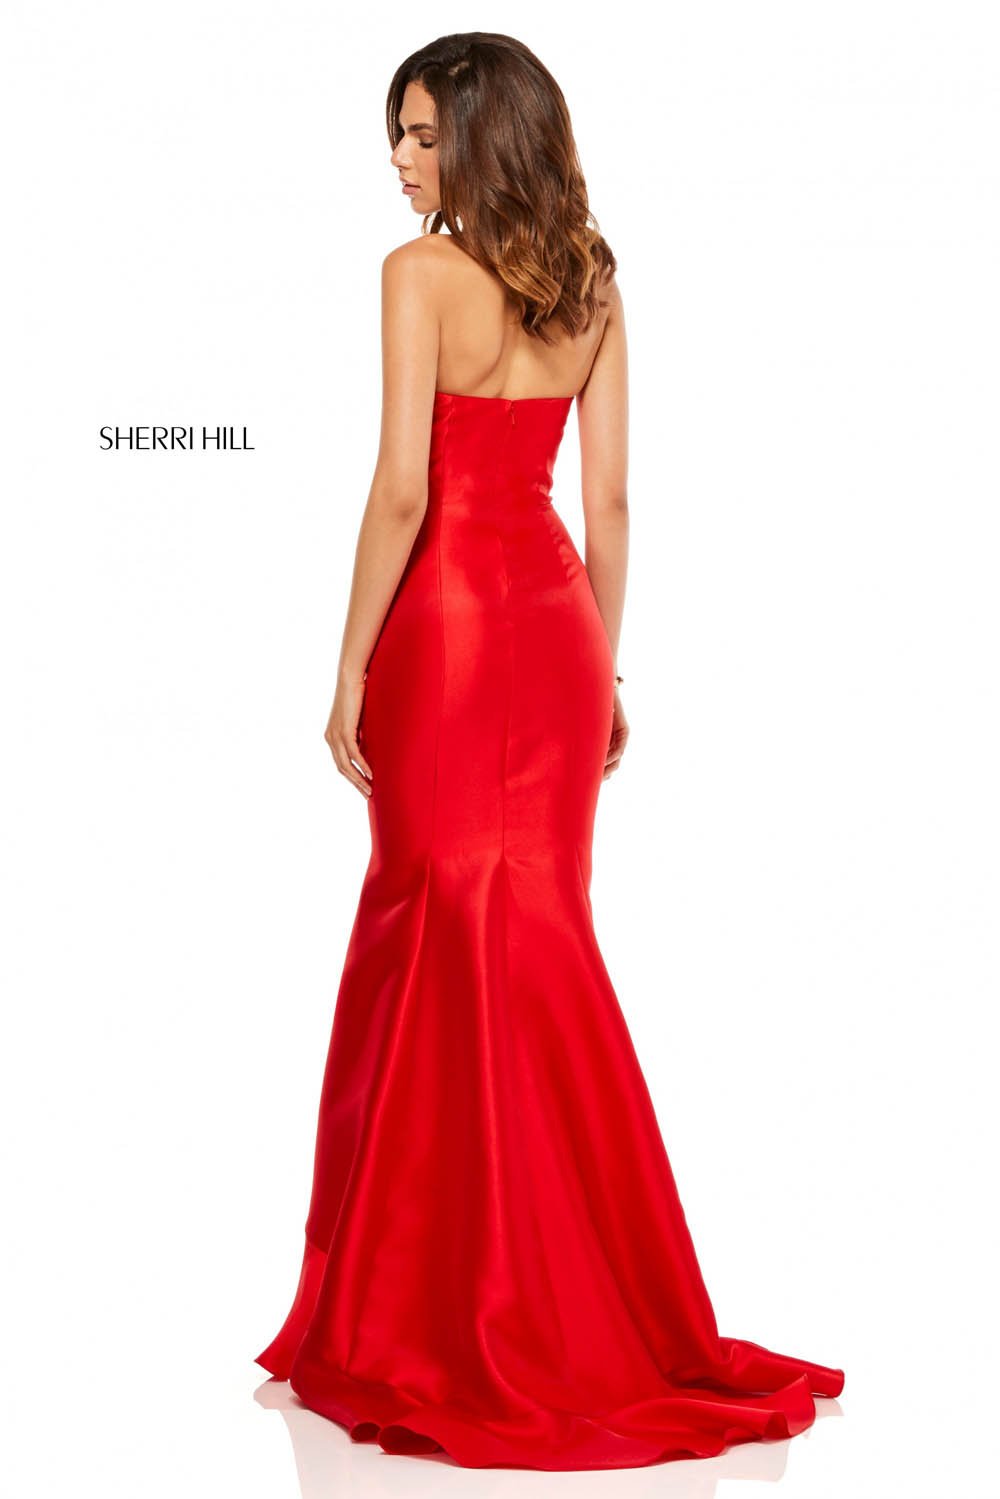 Sherri Hill 52542 dress images in these colors: Hot Pink, Red, Yellow, Light Blue, Navy, Emerald.